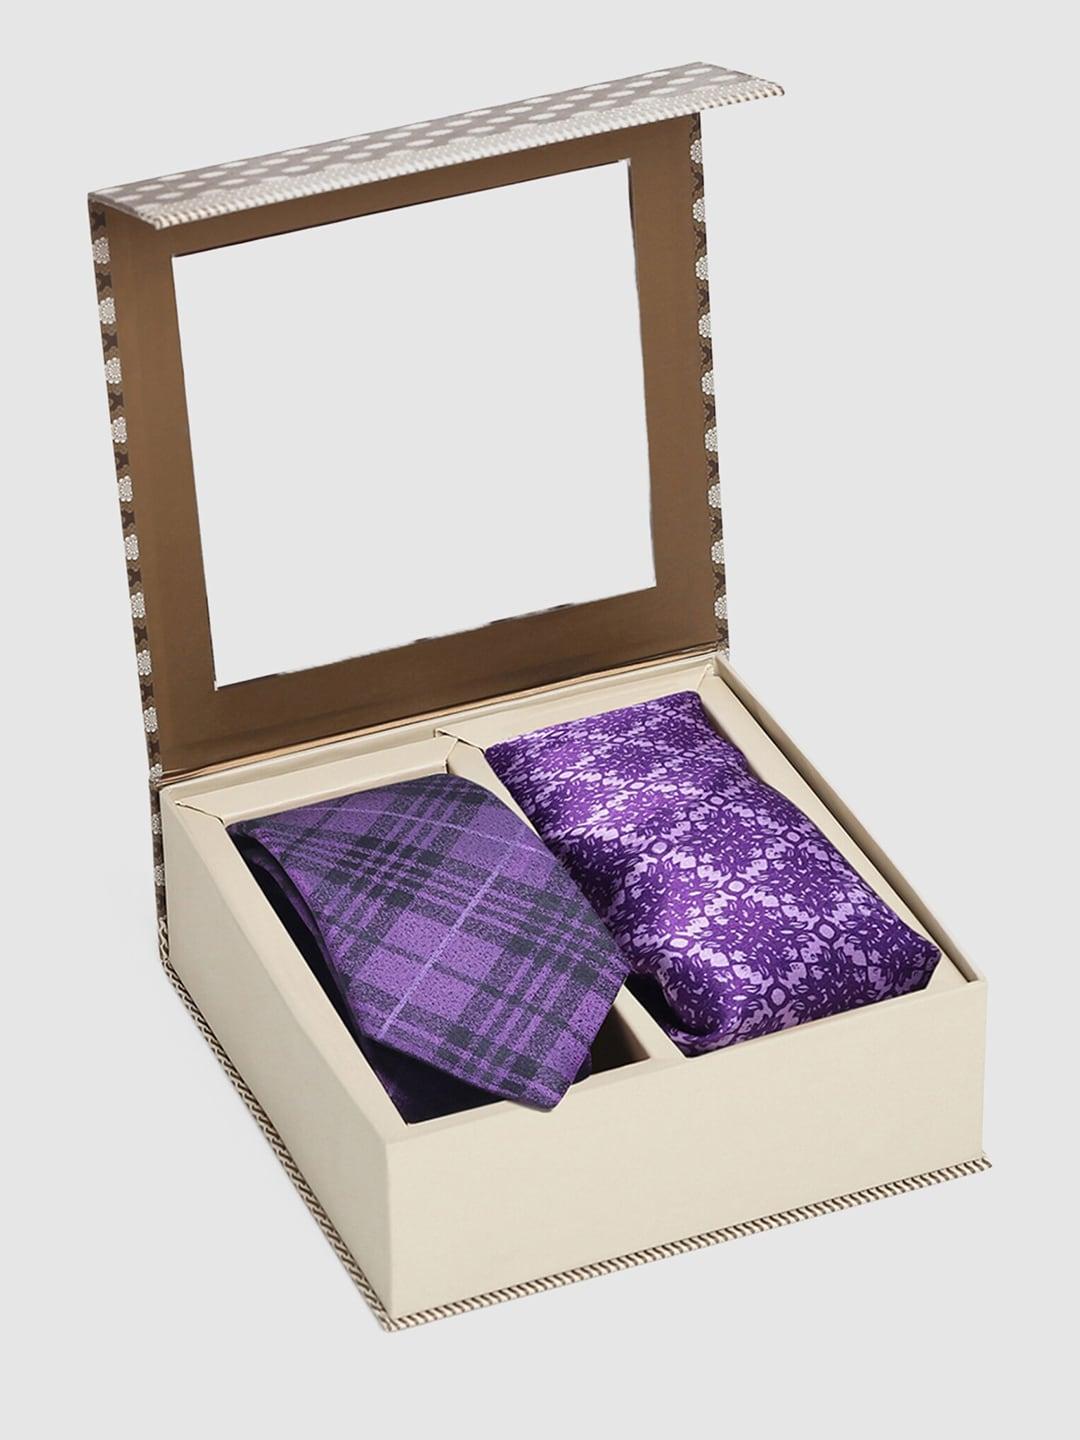 blackberrys-printed-pure-silk-tie-with-pocket-square-in-box